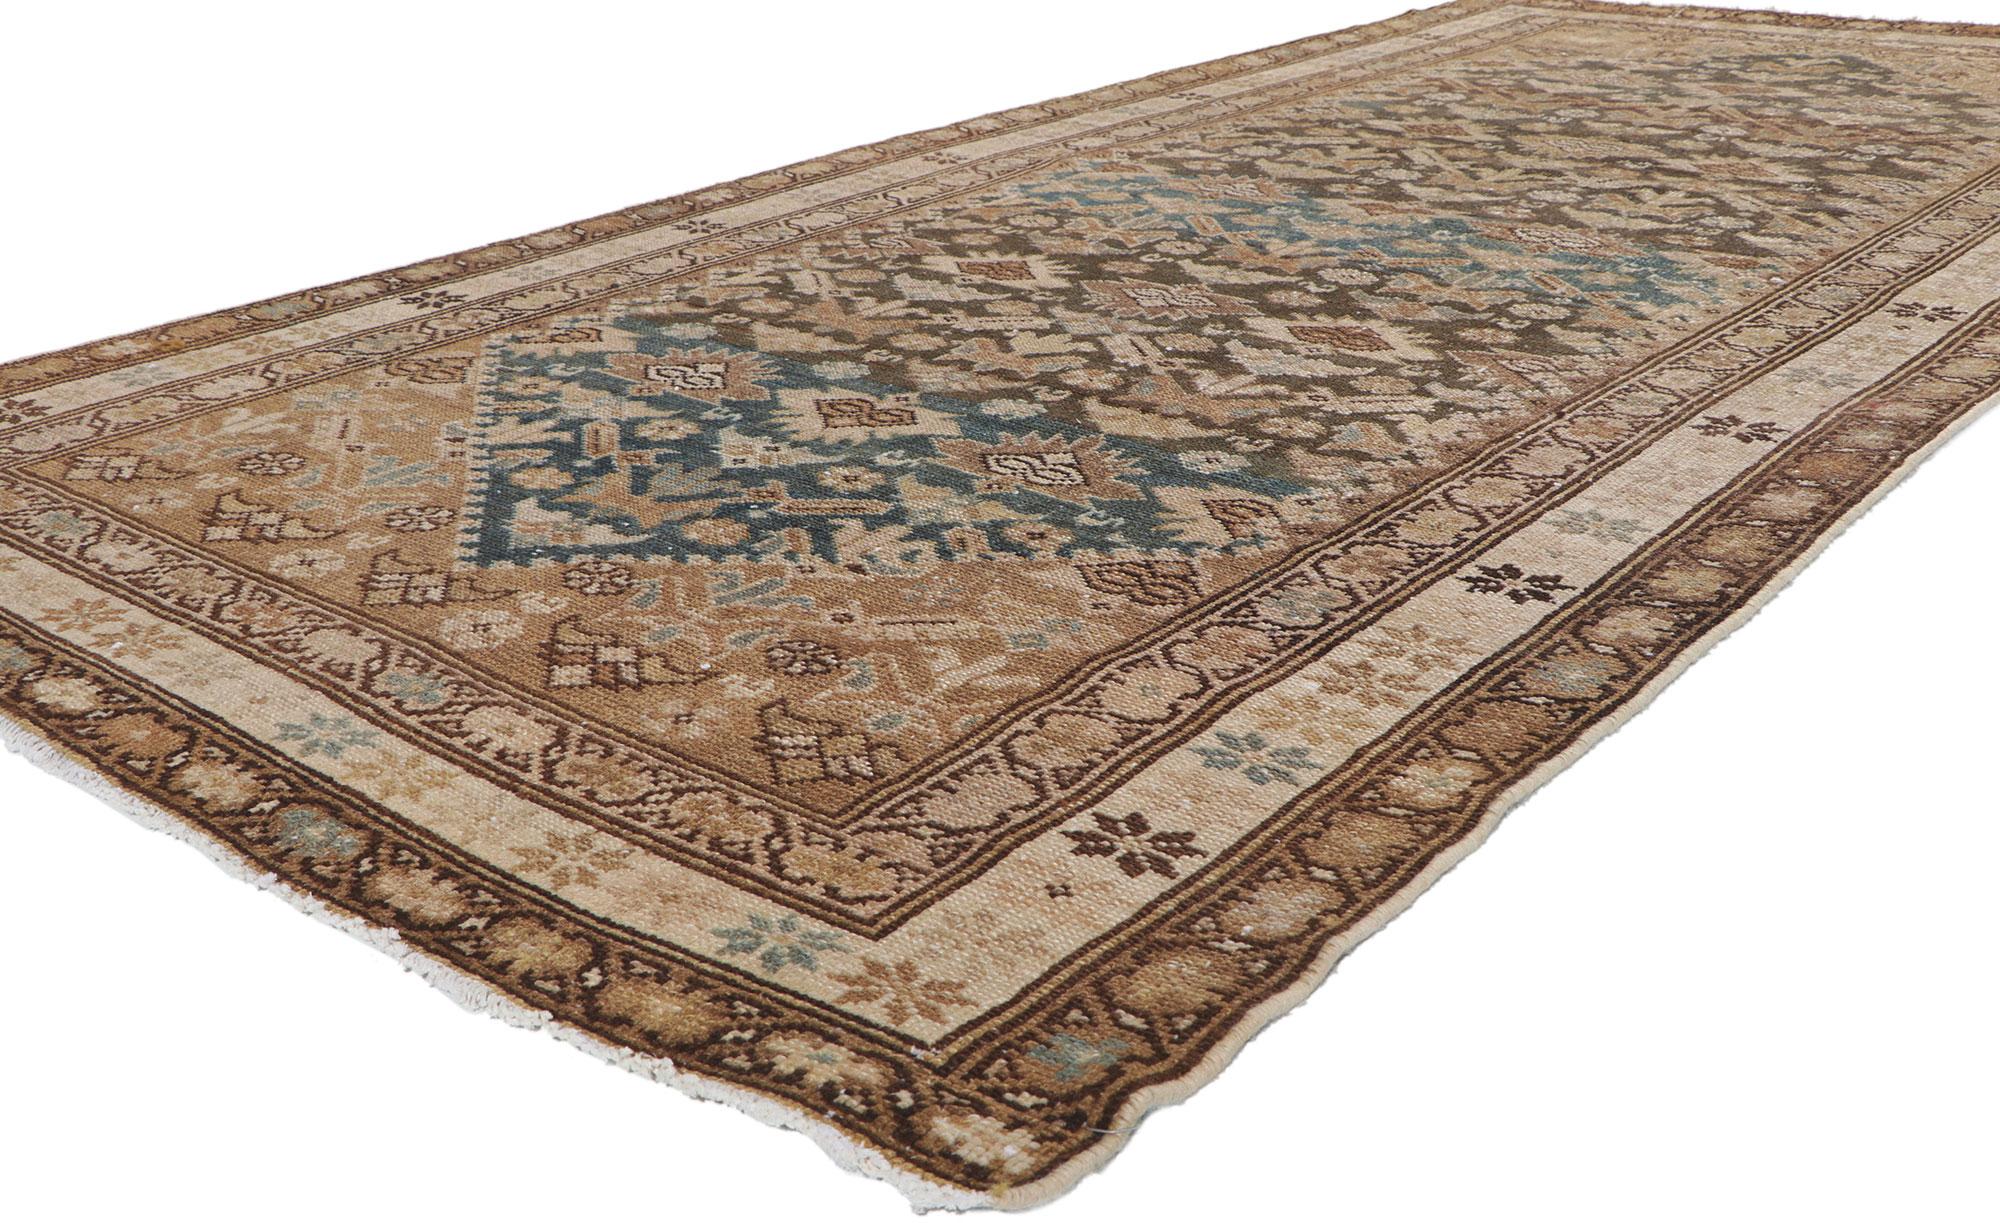 60970 distressed antique Persian Malayer Hallway rug, 04'11 x 10'06. With its lovingly time-worn composition and rugged beauty, this hand-knotted wool distressed vintage Persian Malayer gallery rug is a captivating vision of woven beauty. The